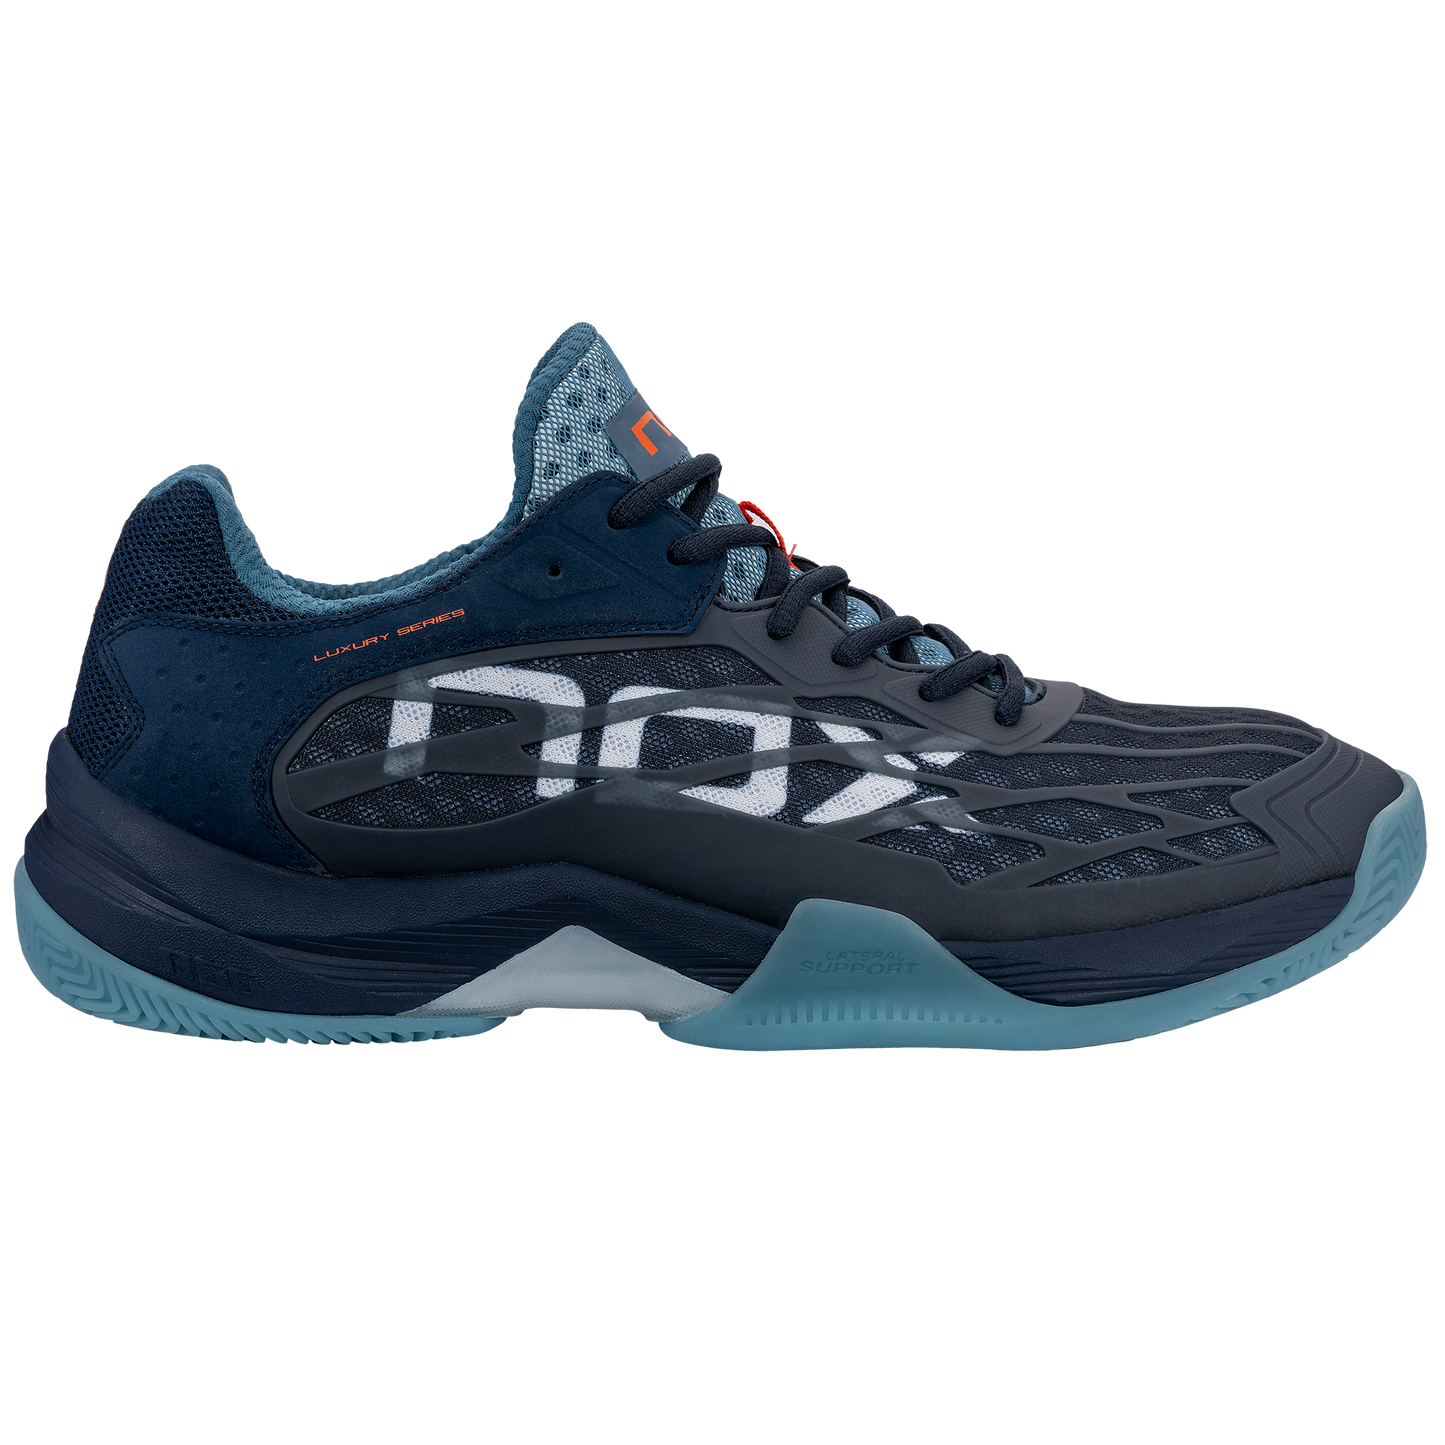 Padel Shoes AT10 LUX Navy Blue